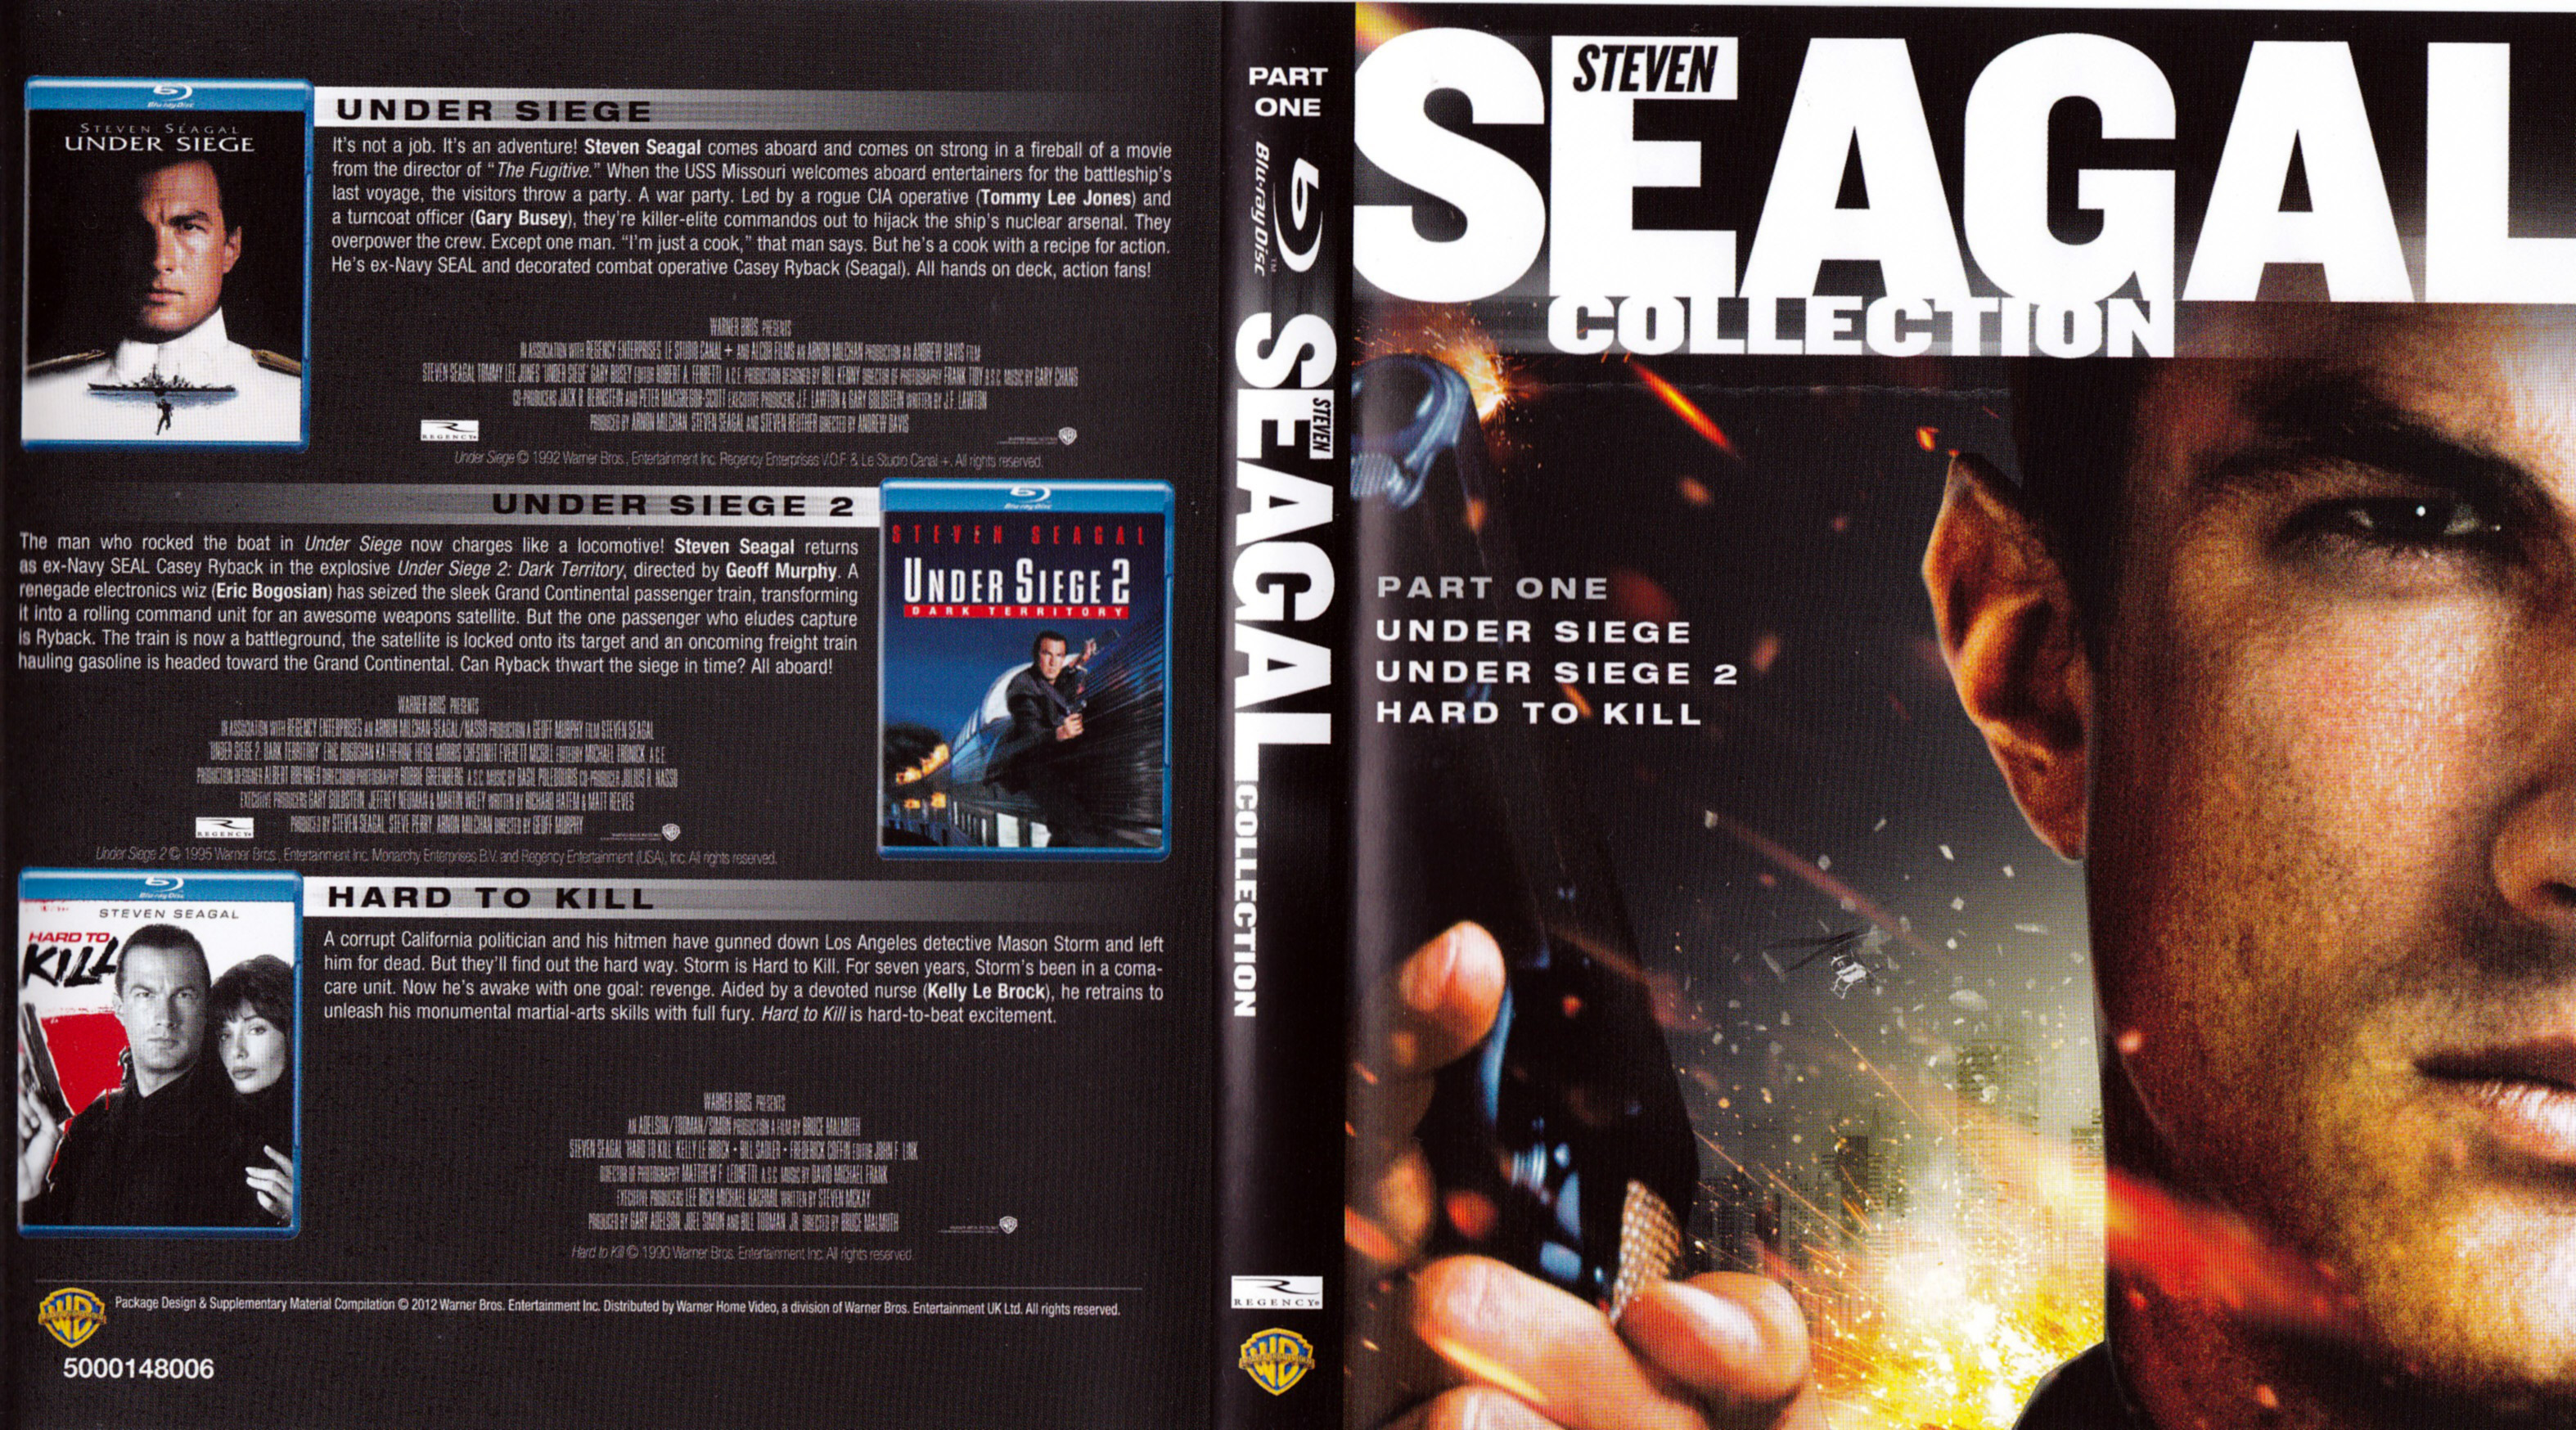 Jaquette DVD Steven Seagal Collection Part 1 (BLU-RAY)